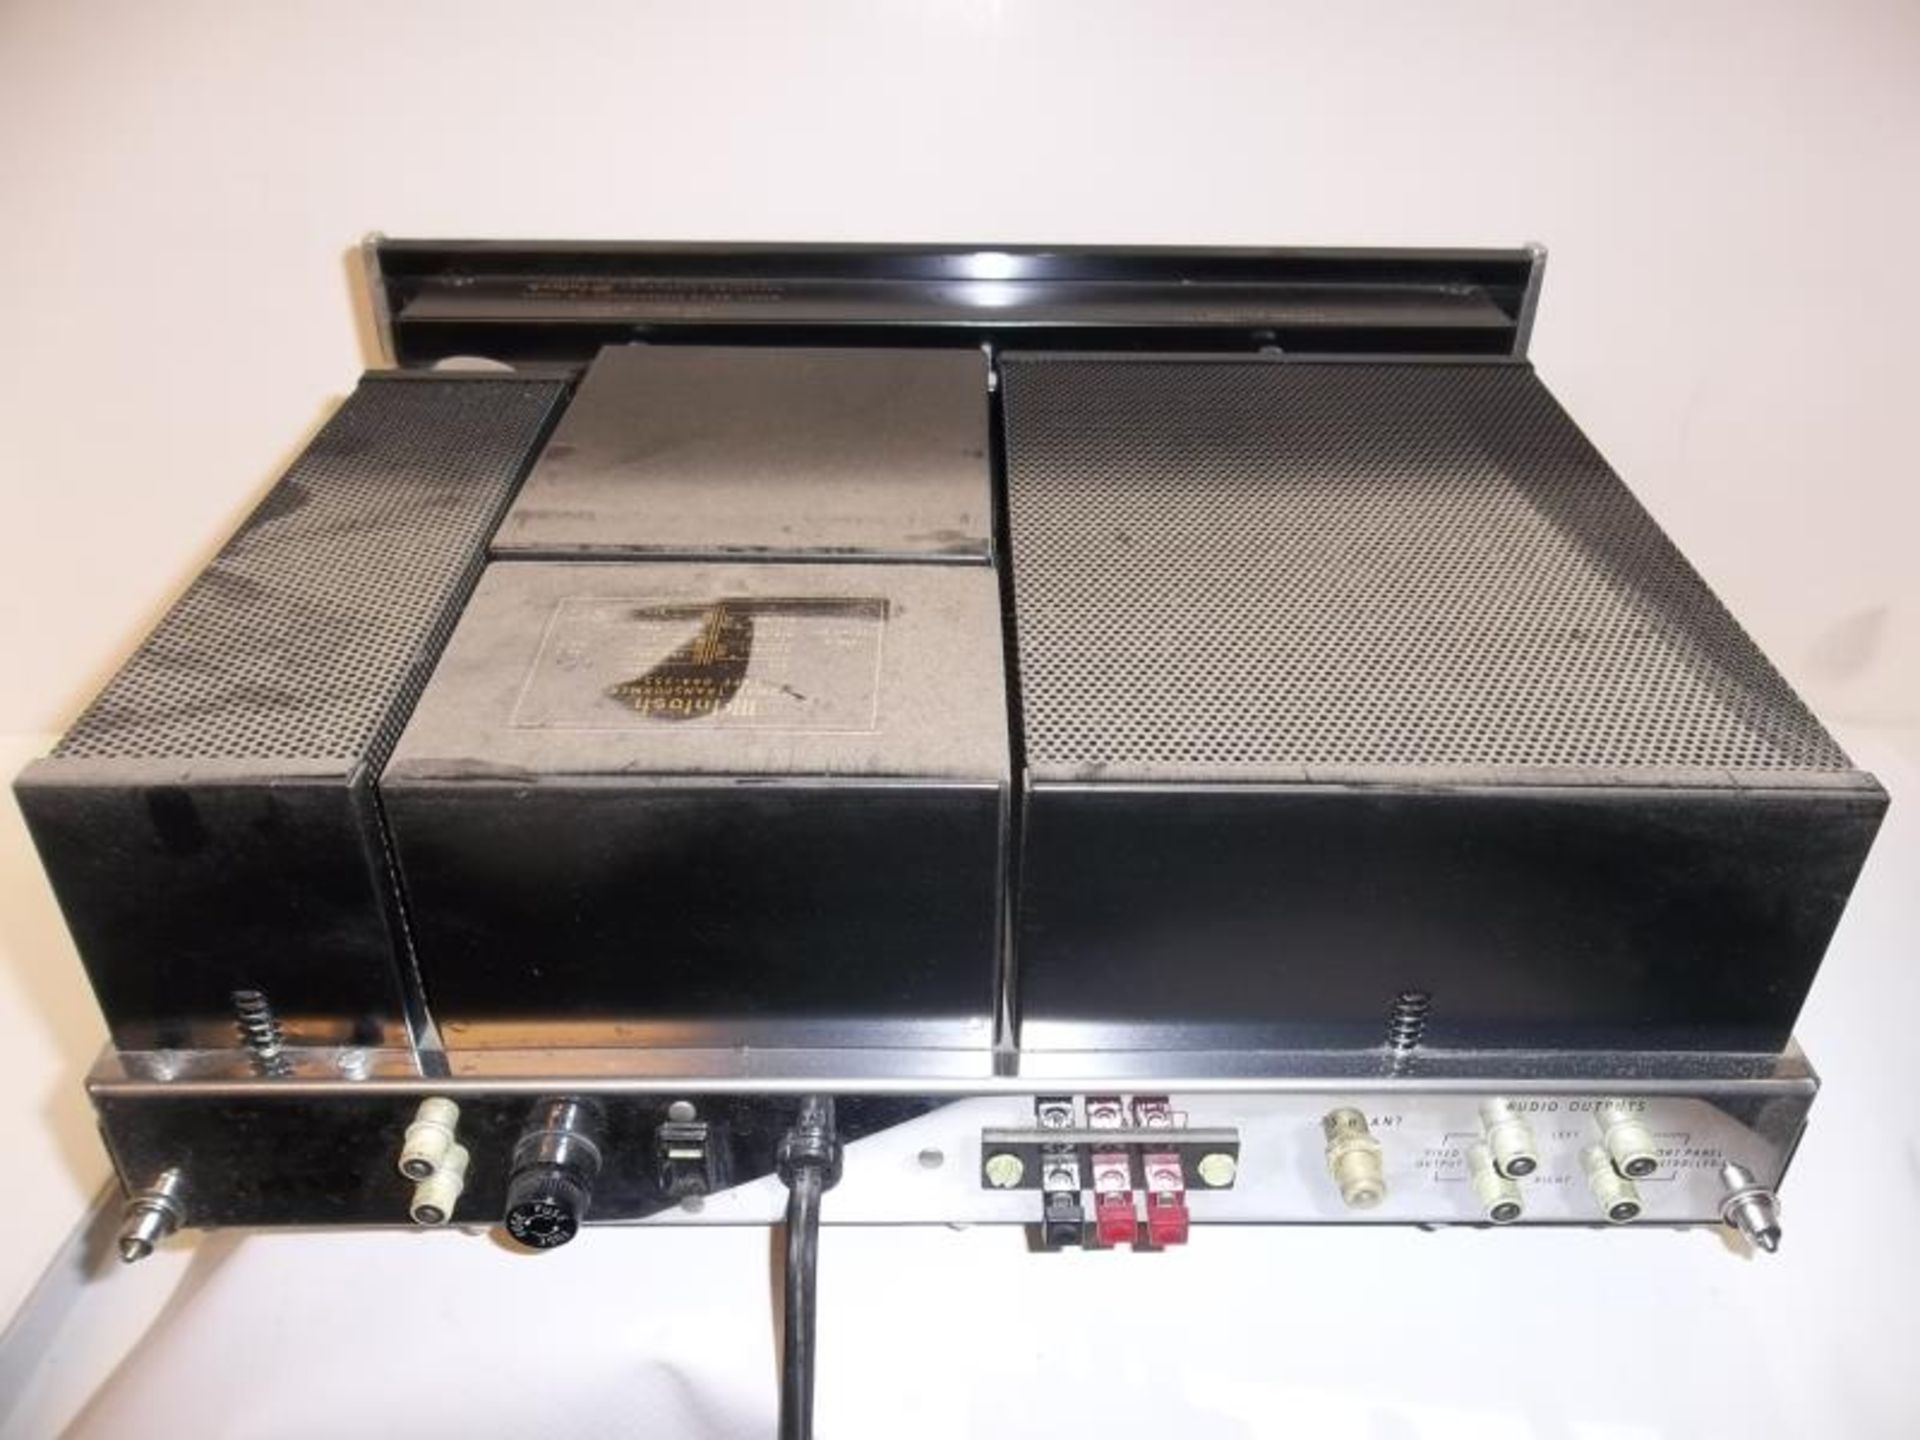 McIntosh MR 78, FM Tuner, with cage, wood case, in McIntosh cardboard box, s # AD2300, tested - - Image 5 of 7